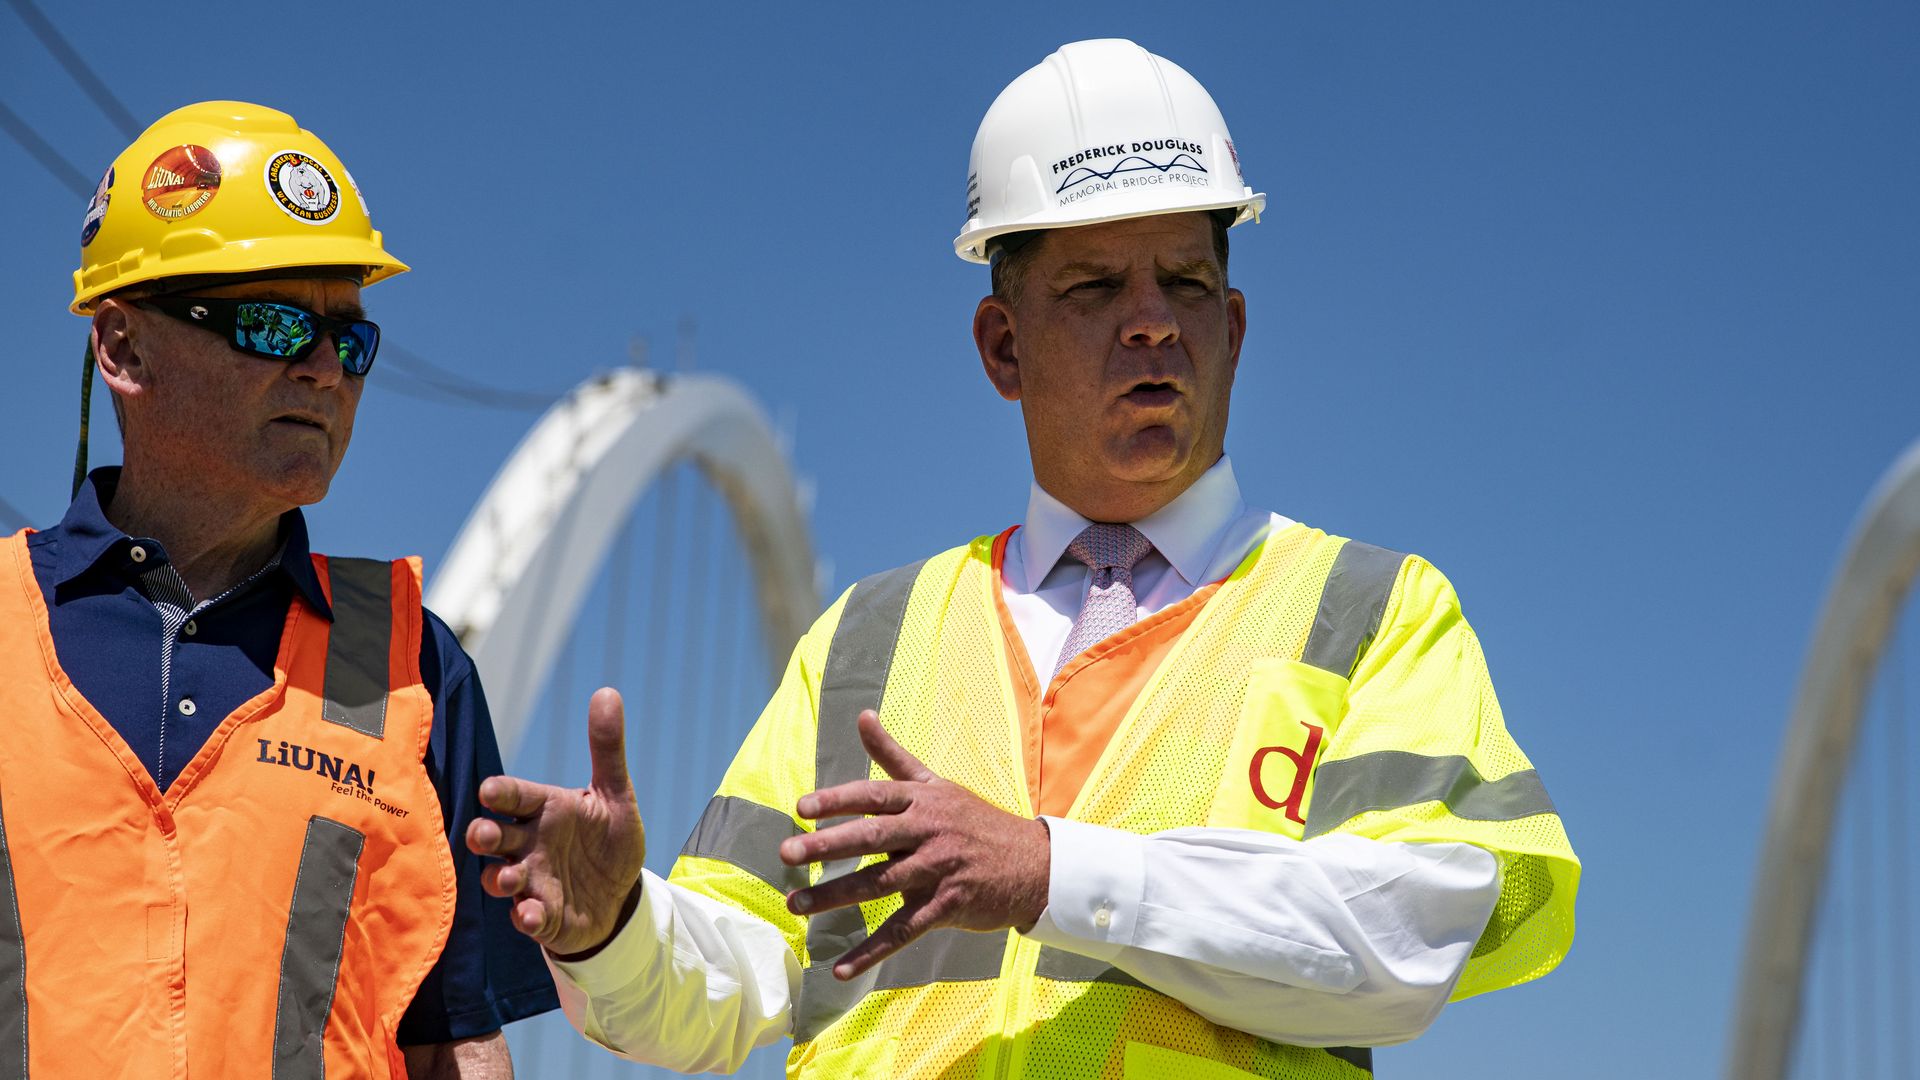 Labor Secretary Marty Walsh is seen touring a bridge construction project in Washington, D.C.